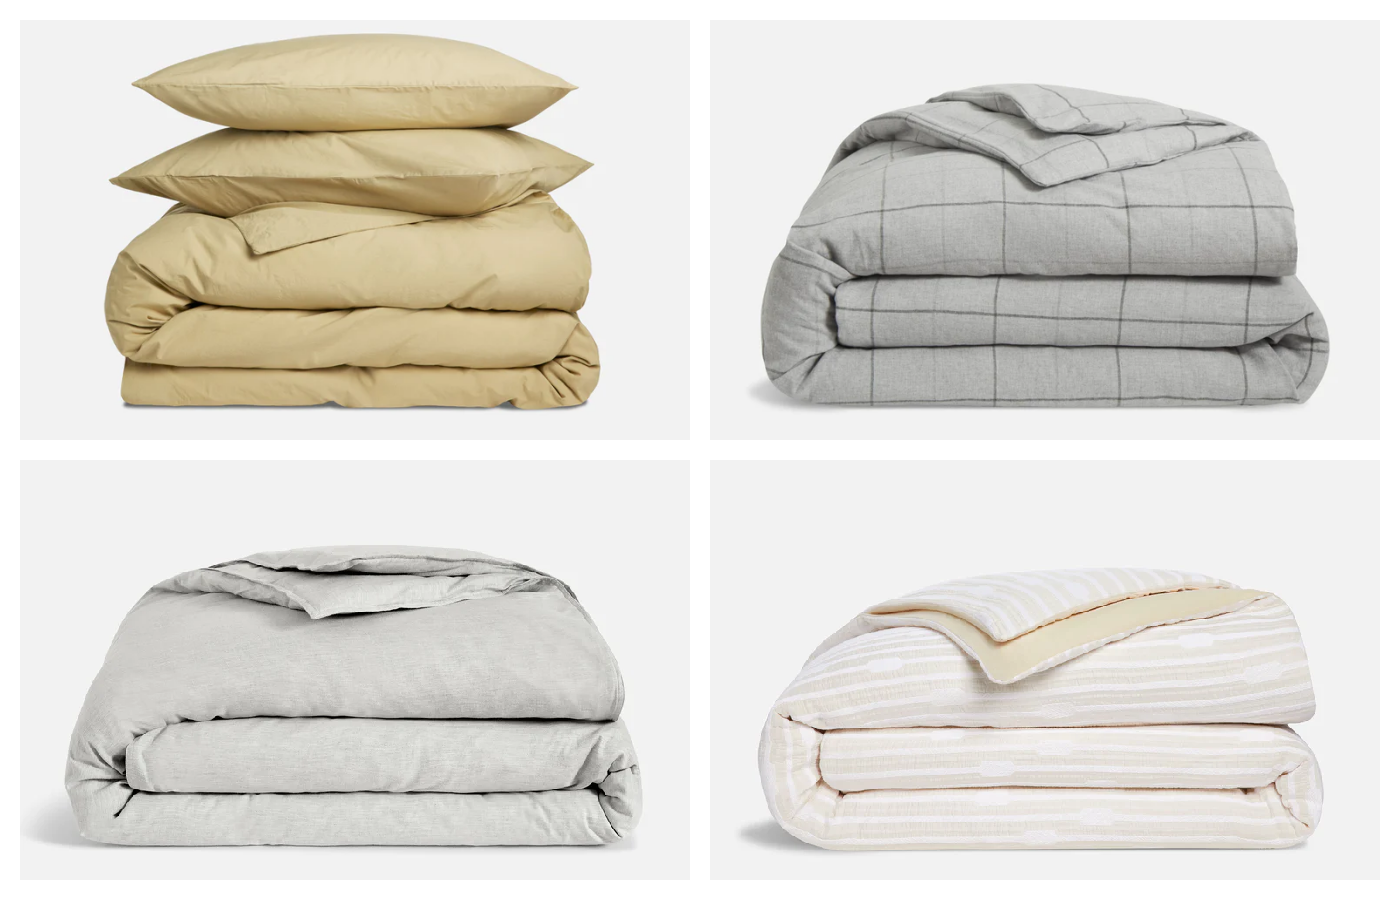 Top 8 Duvet Covers For A Perfect Night’s Sleep